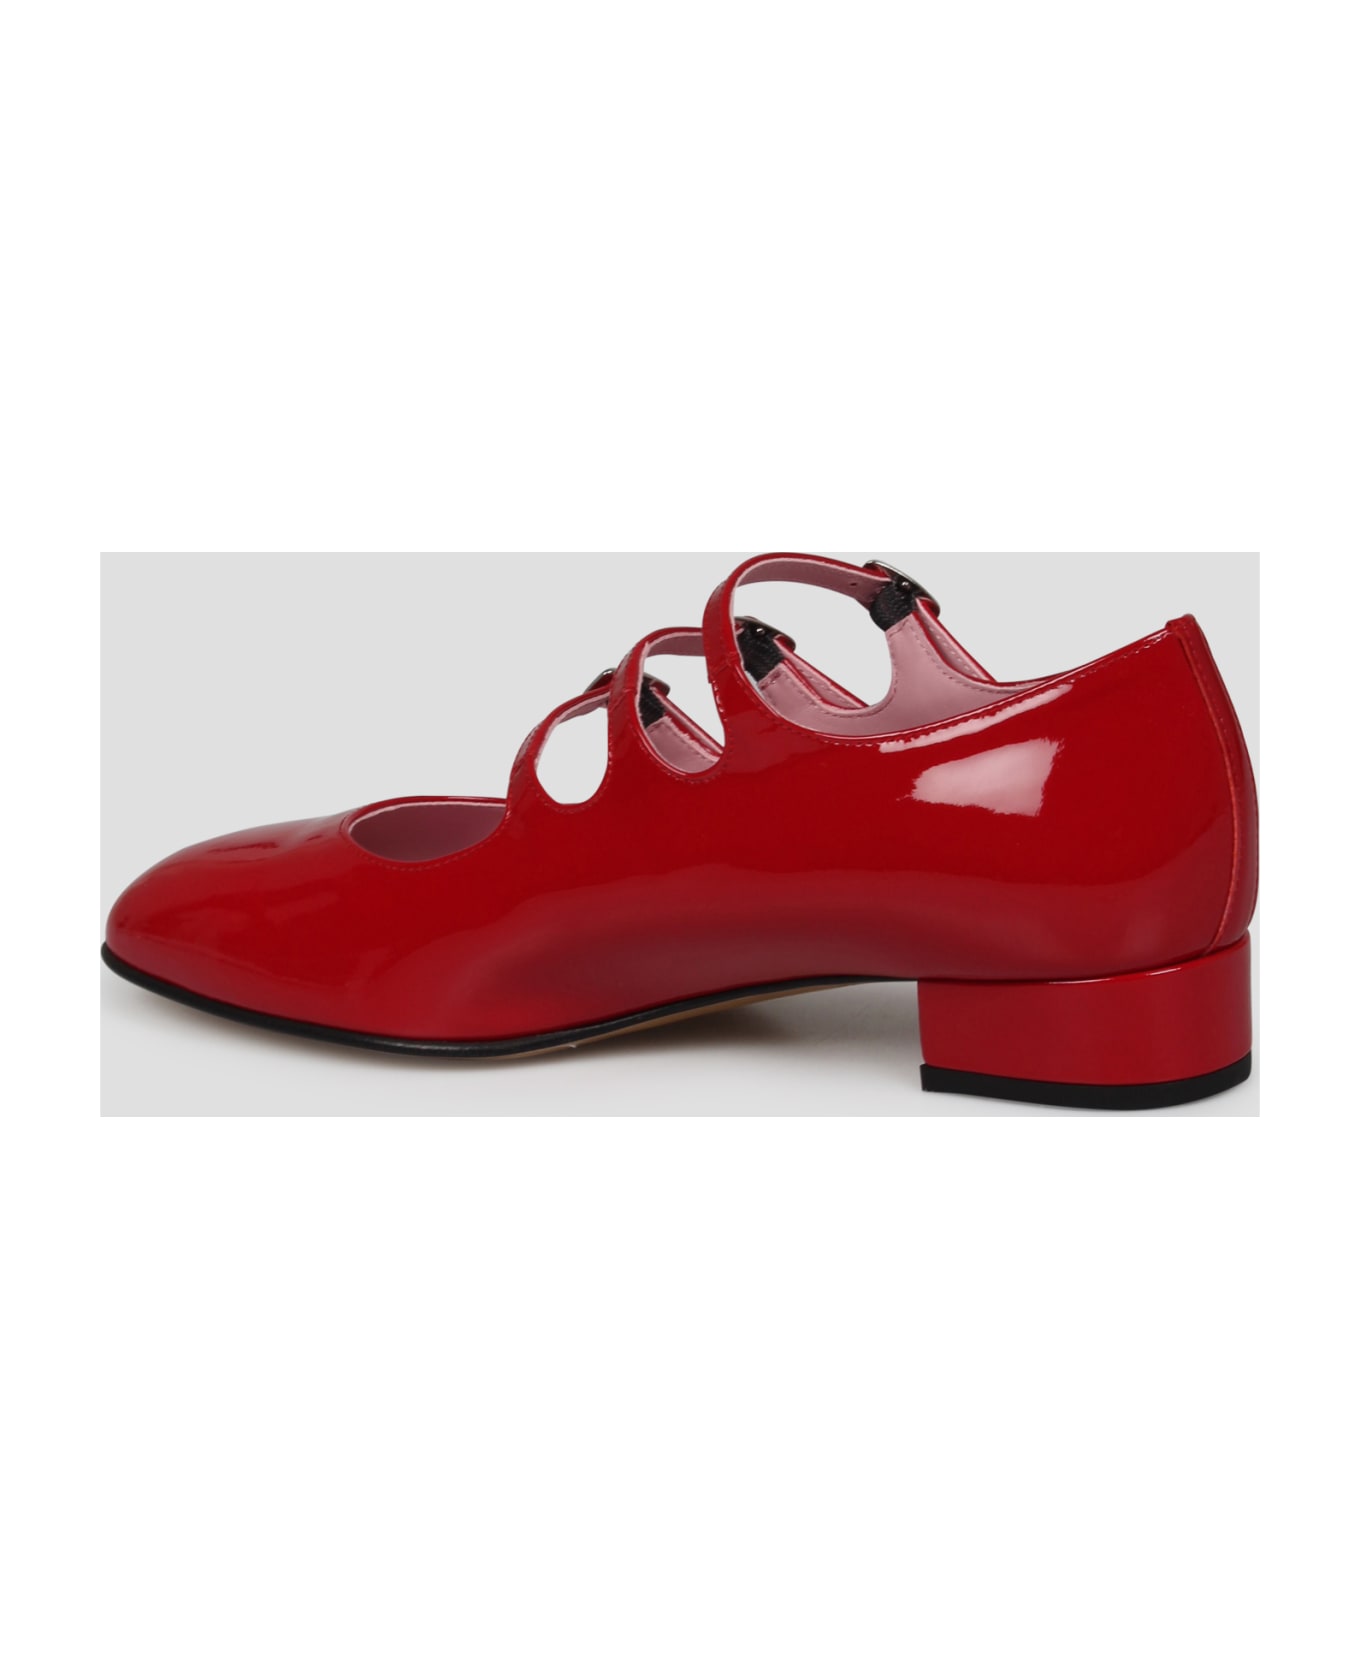 Carel Ariana Mary Jane Pumps - Red